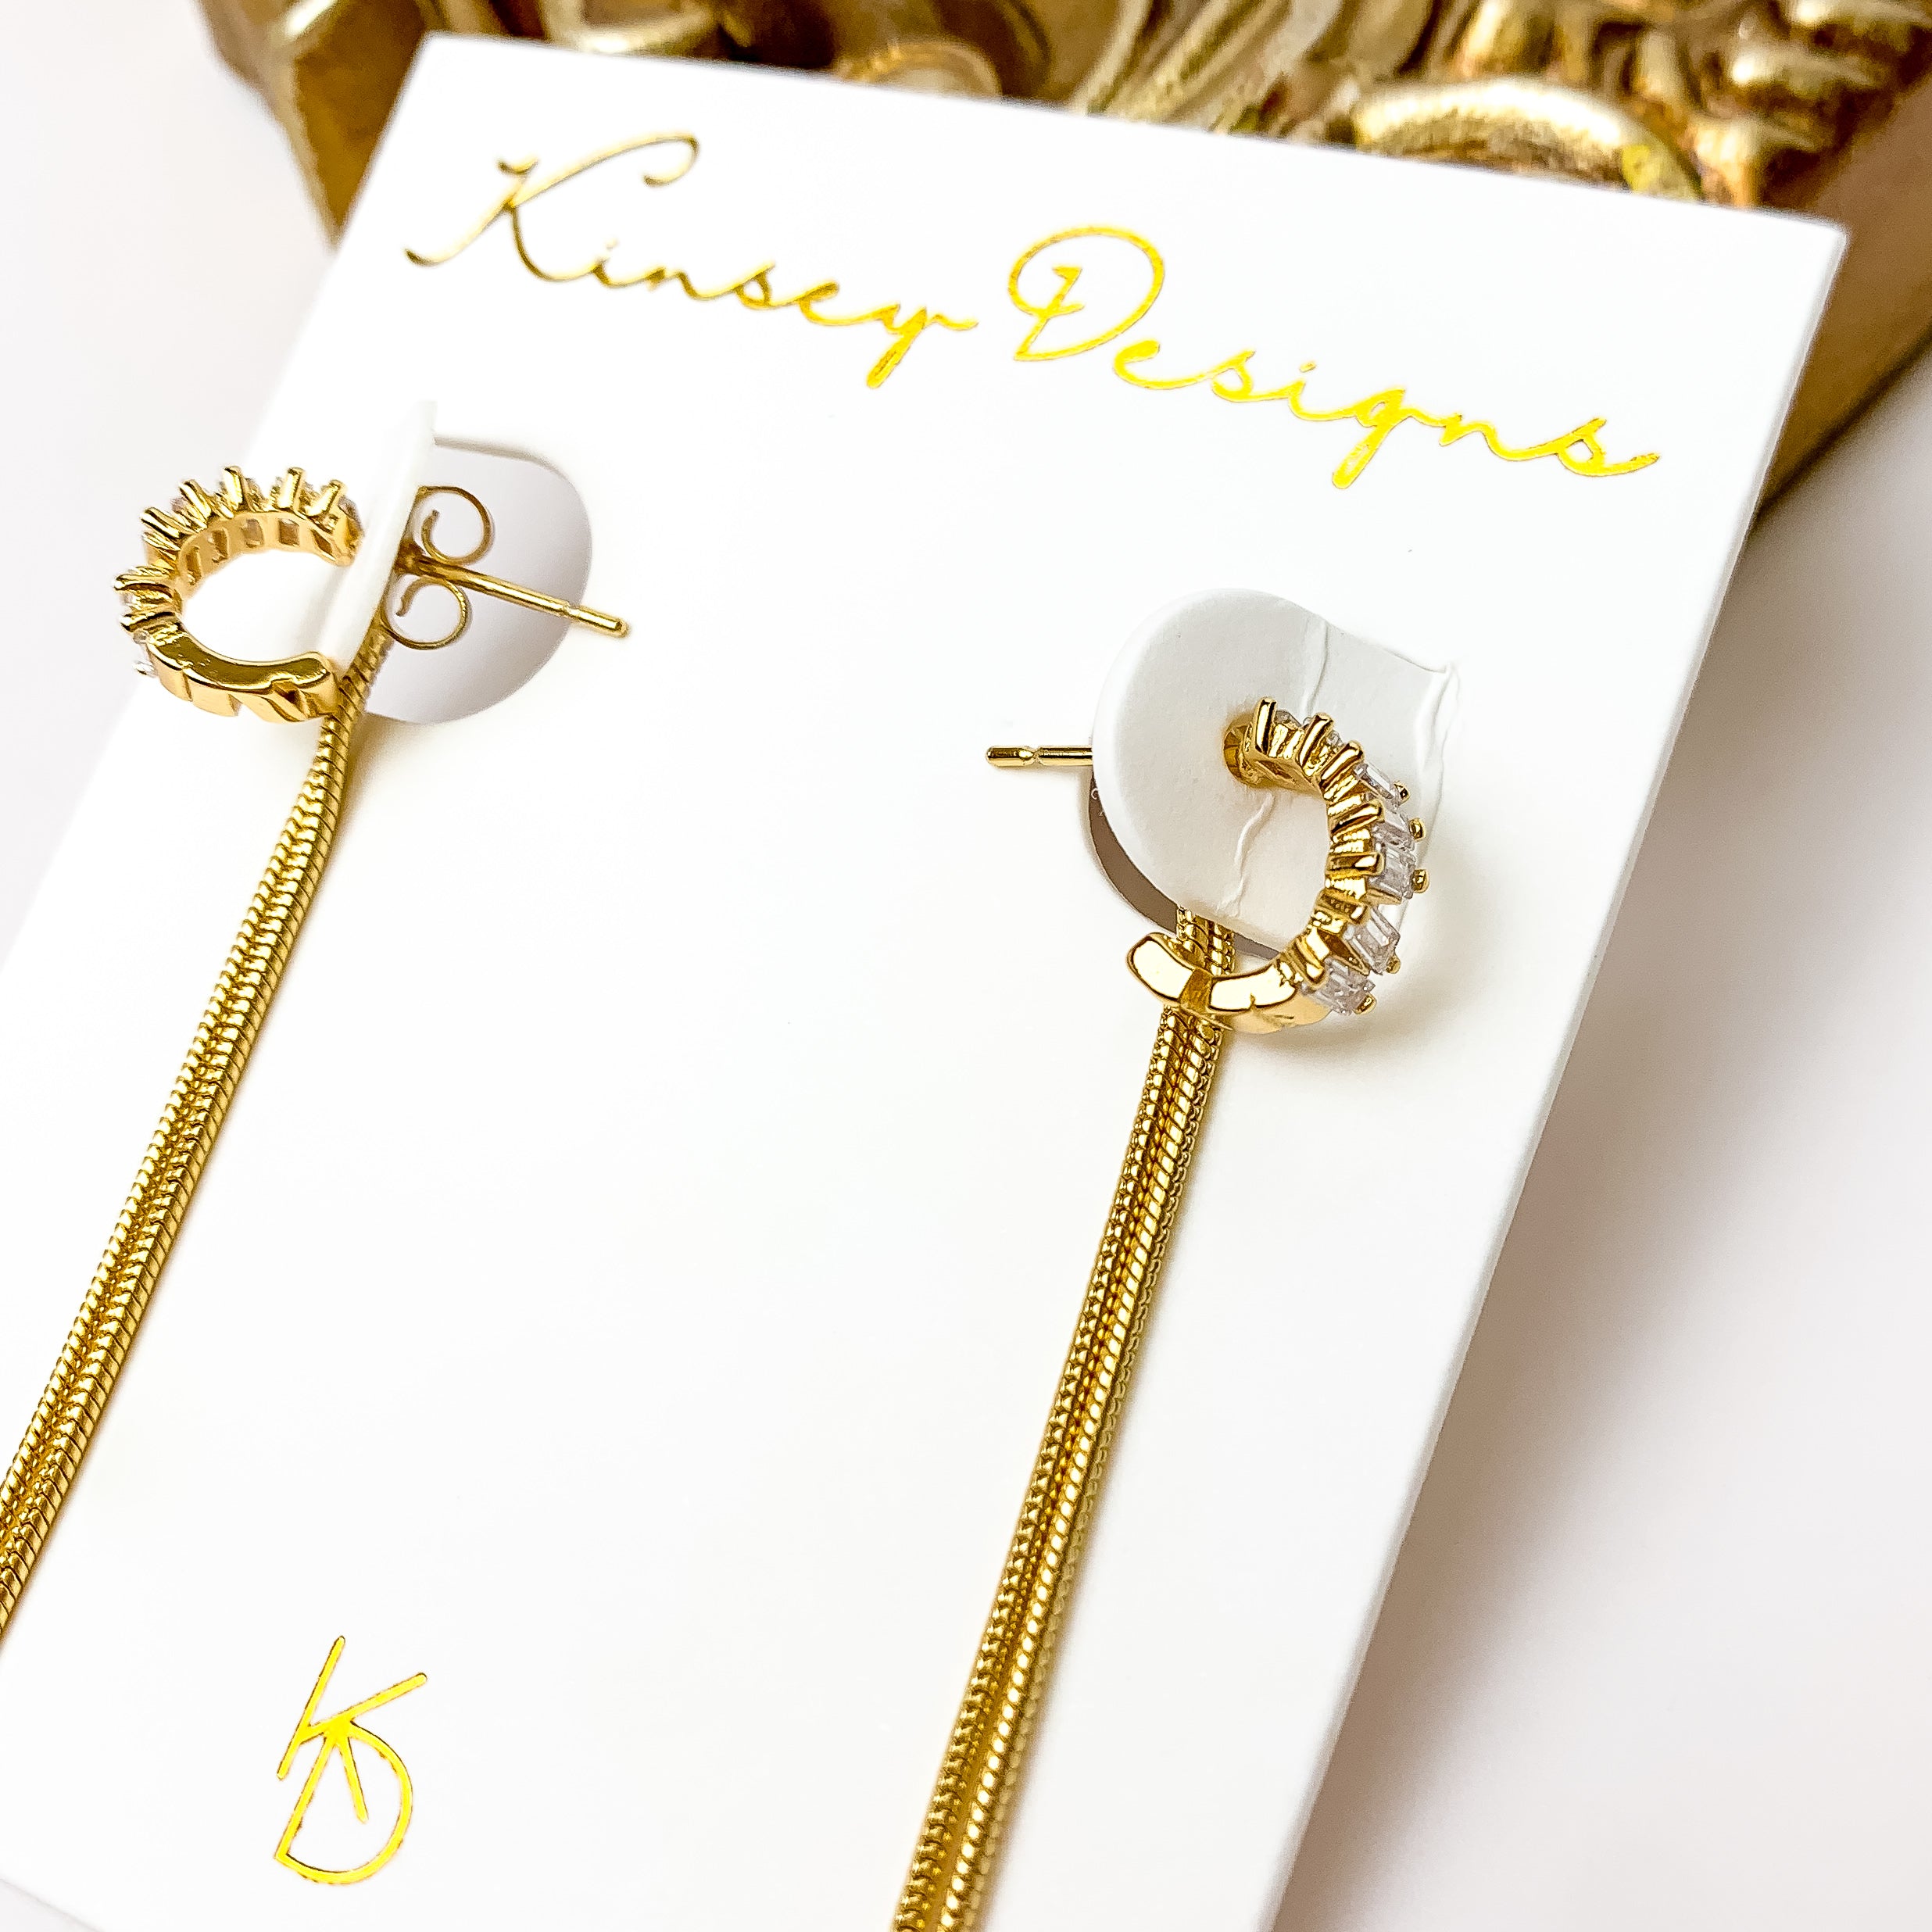 Kinsey Designs | Callie Earrings - Giddy Up Glamour Boutique